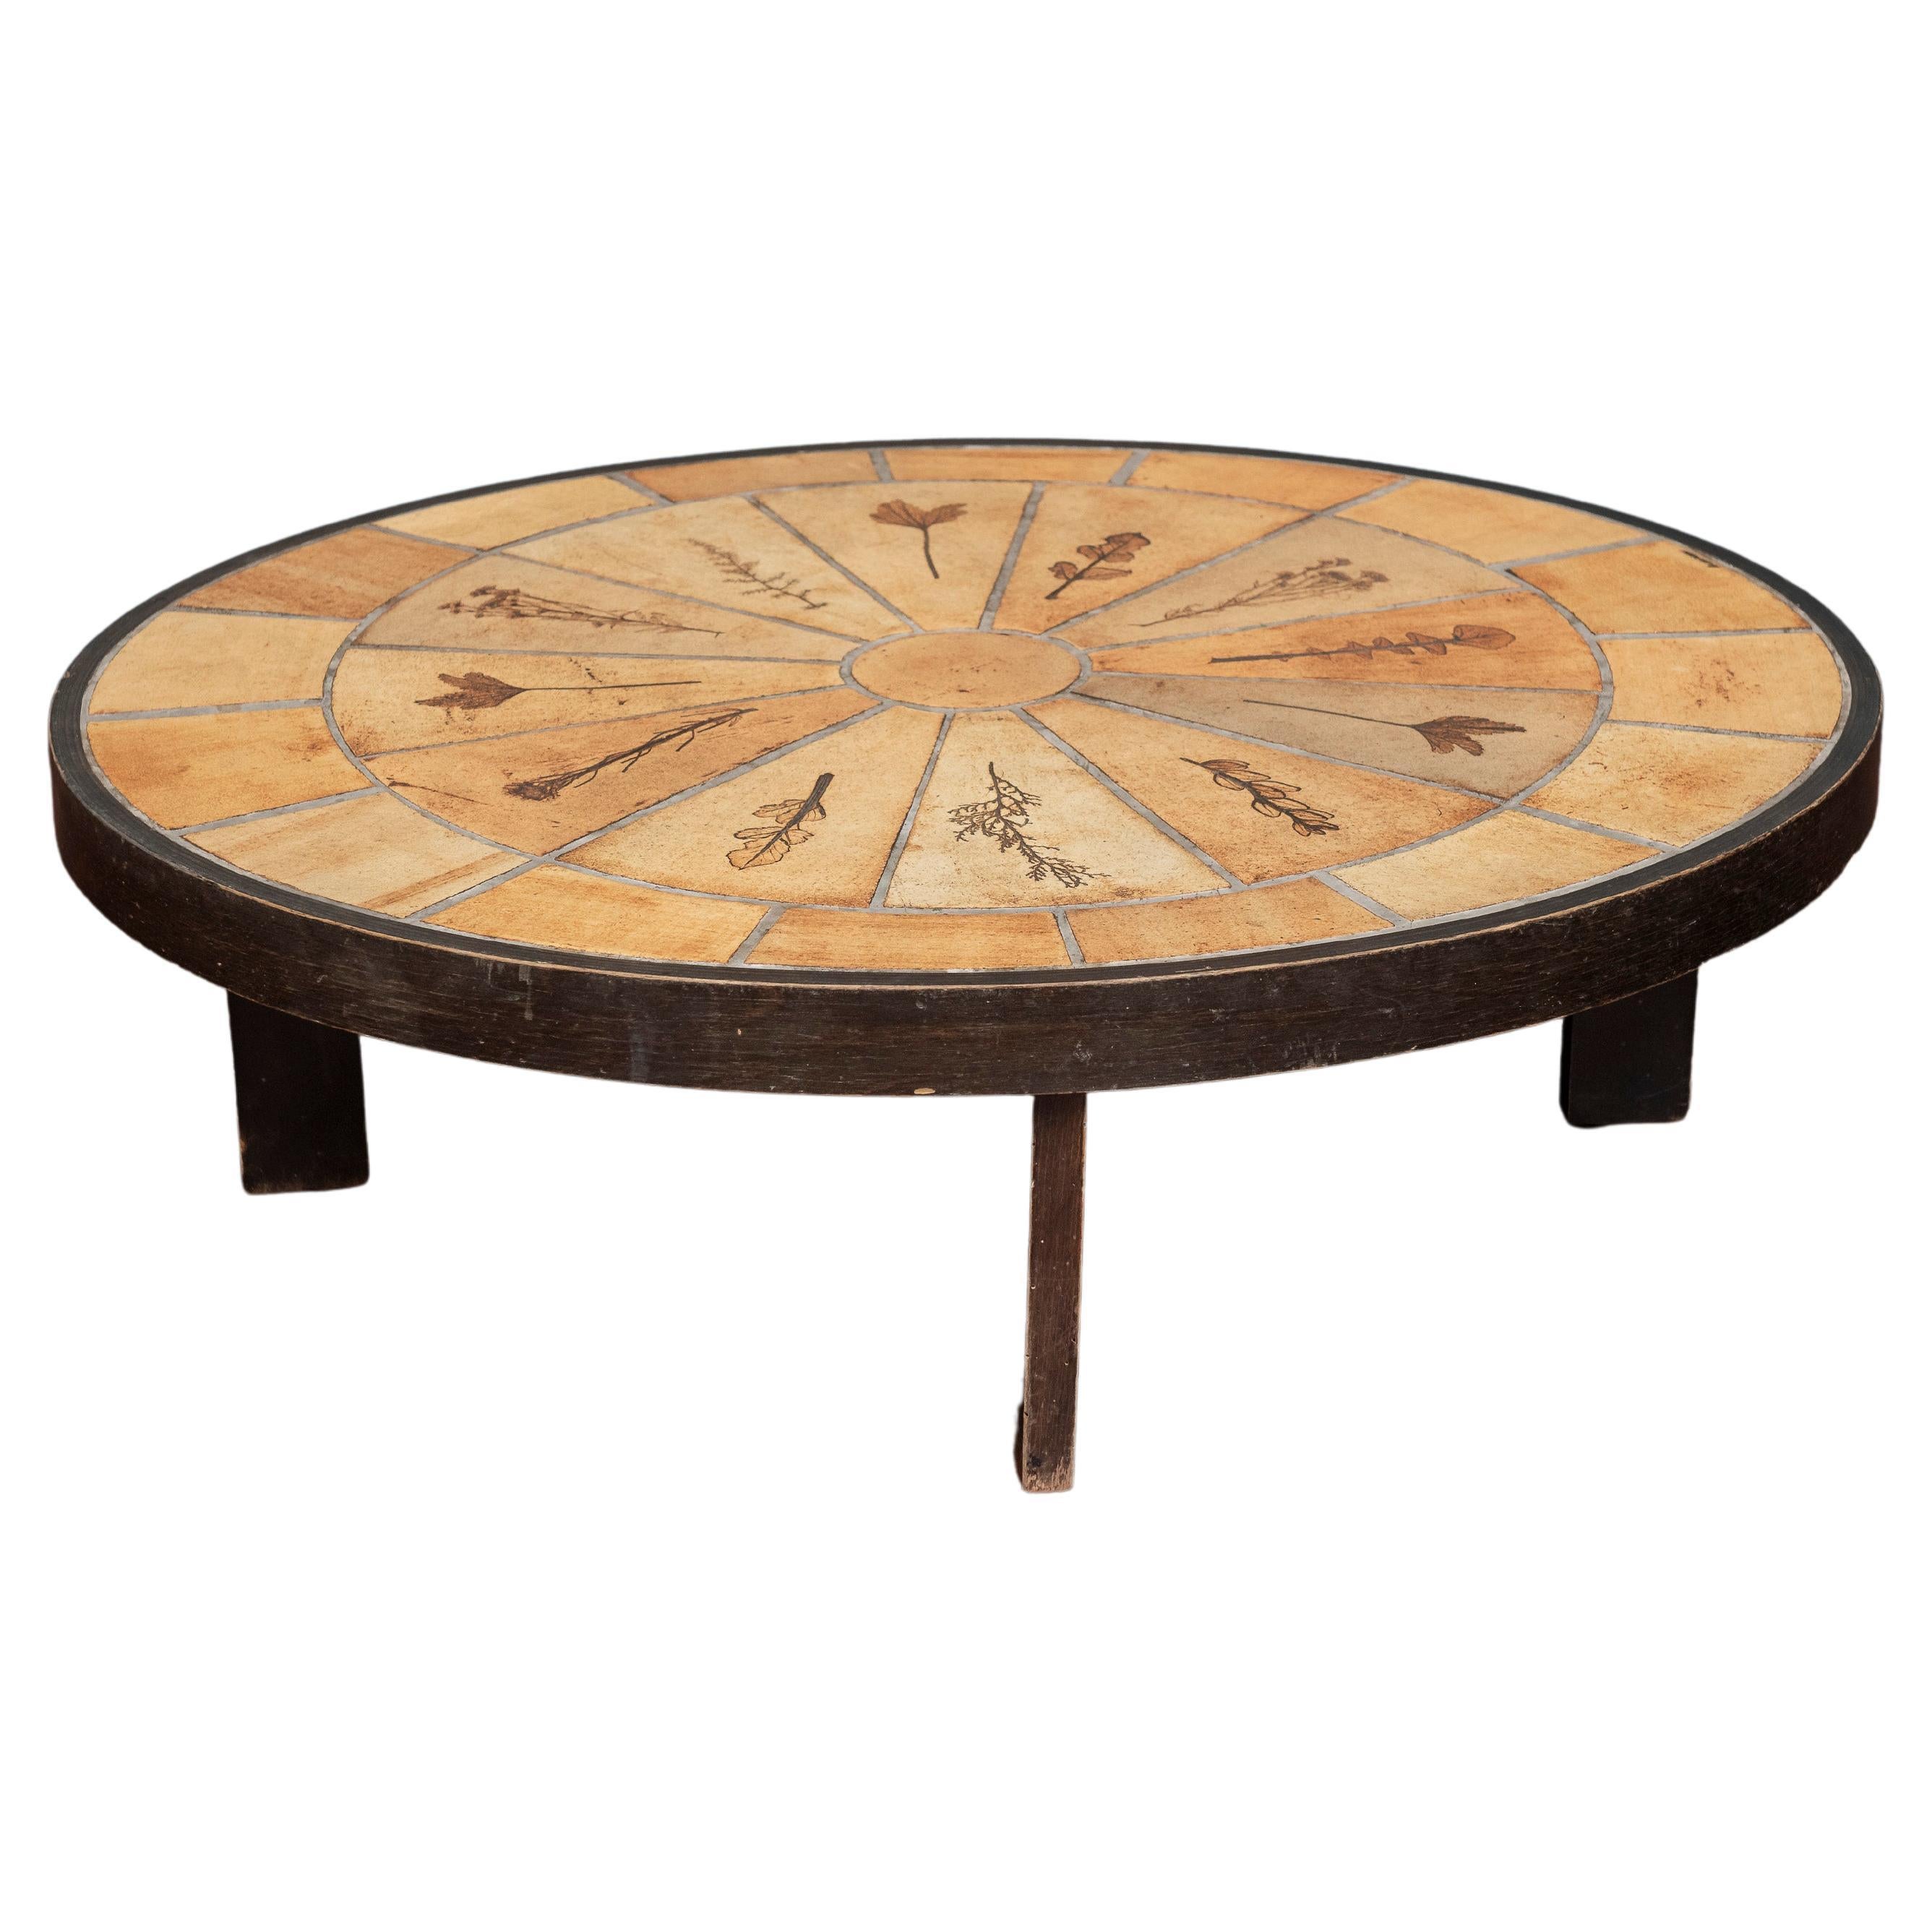 Roger Capron Gres des Garrigues Oval Coffee Table, France For Sale